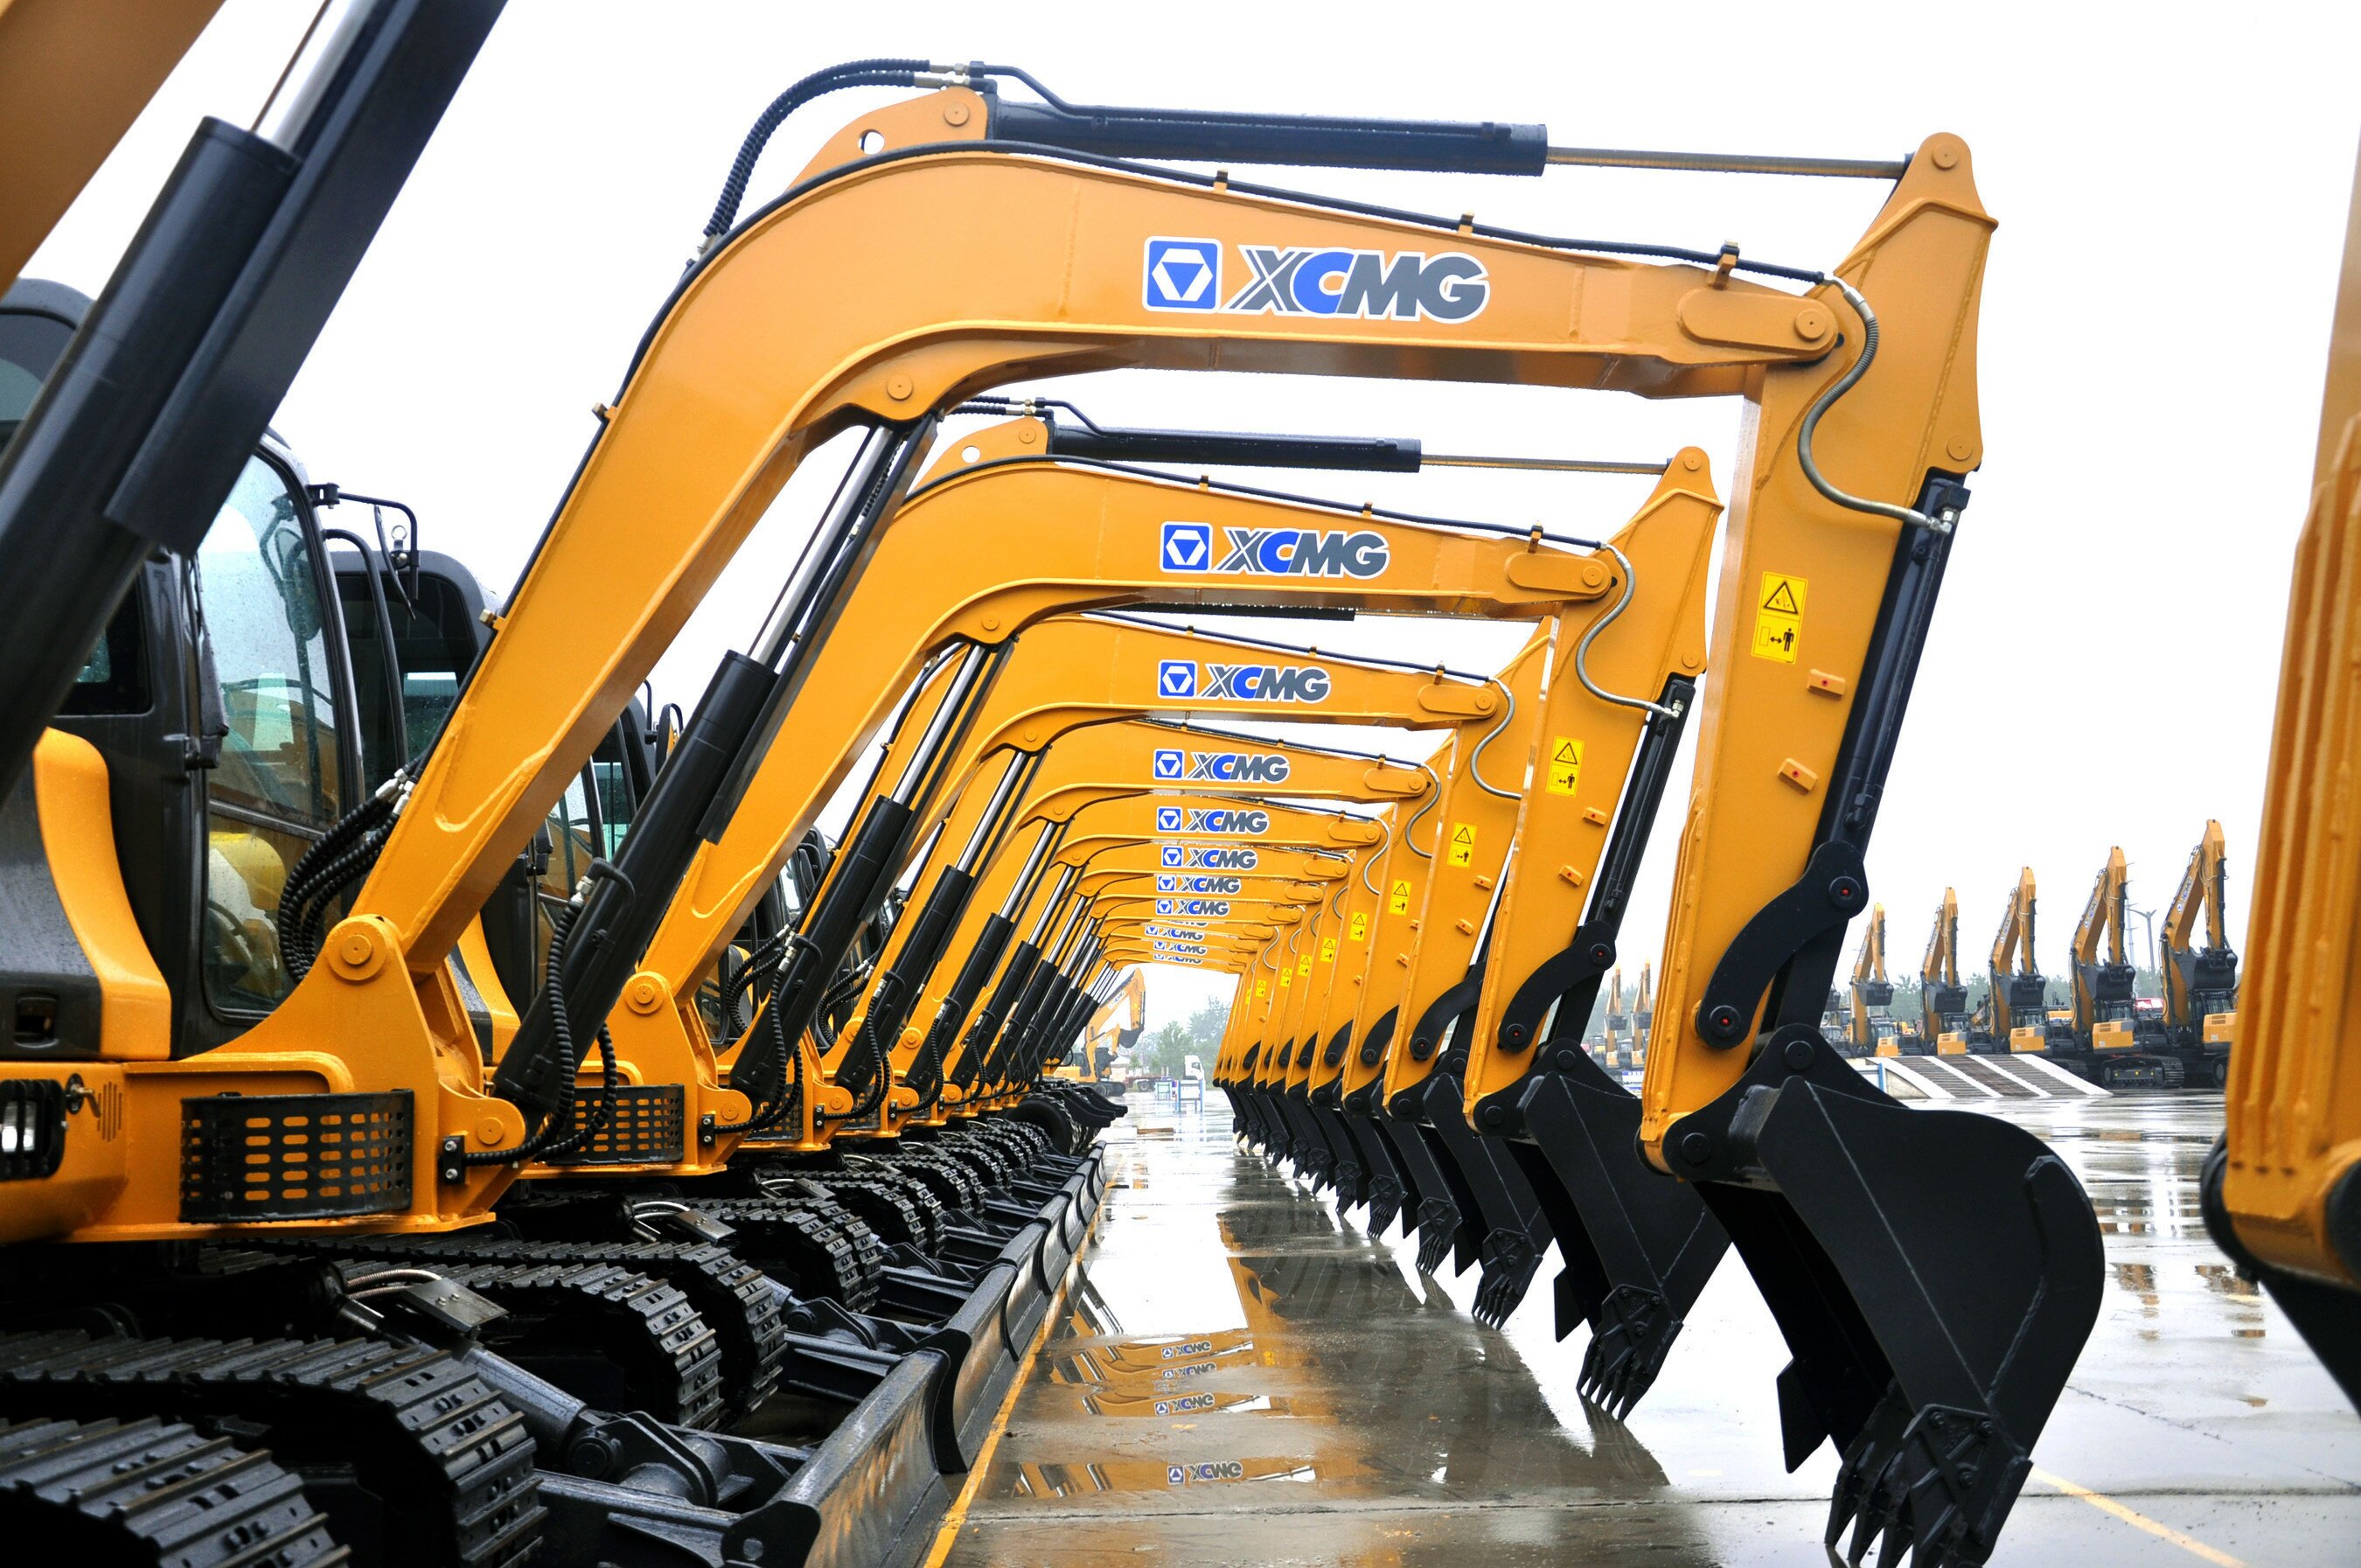 300 super large-tonnage excavators produced by XCMG are exported to countries covered in Belt and Road Initiative (PRNewsFoto/XCMG)